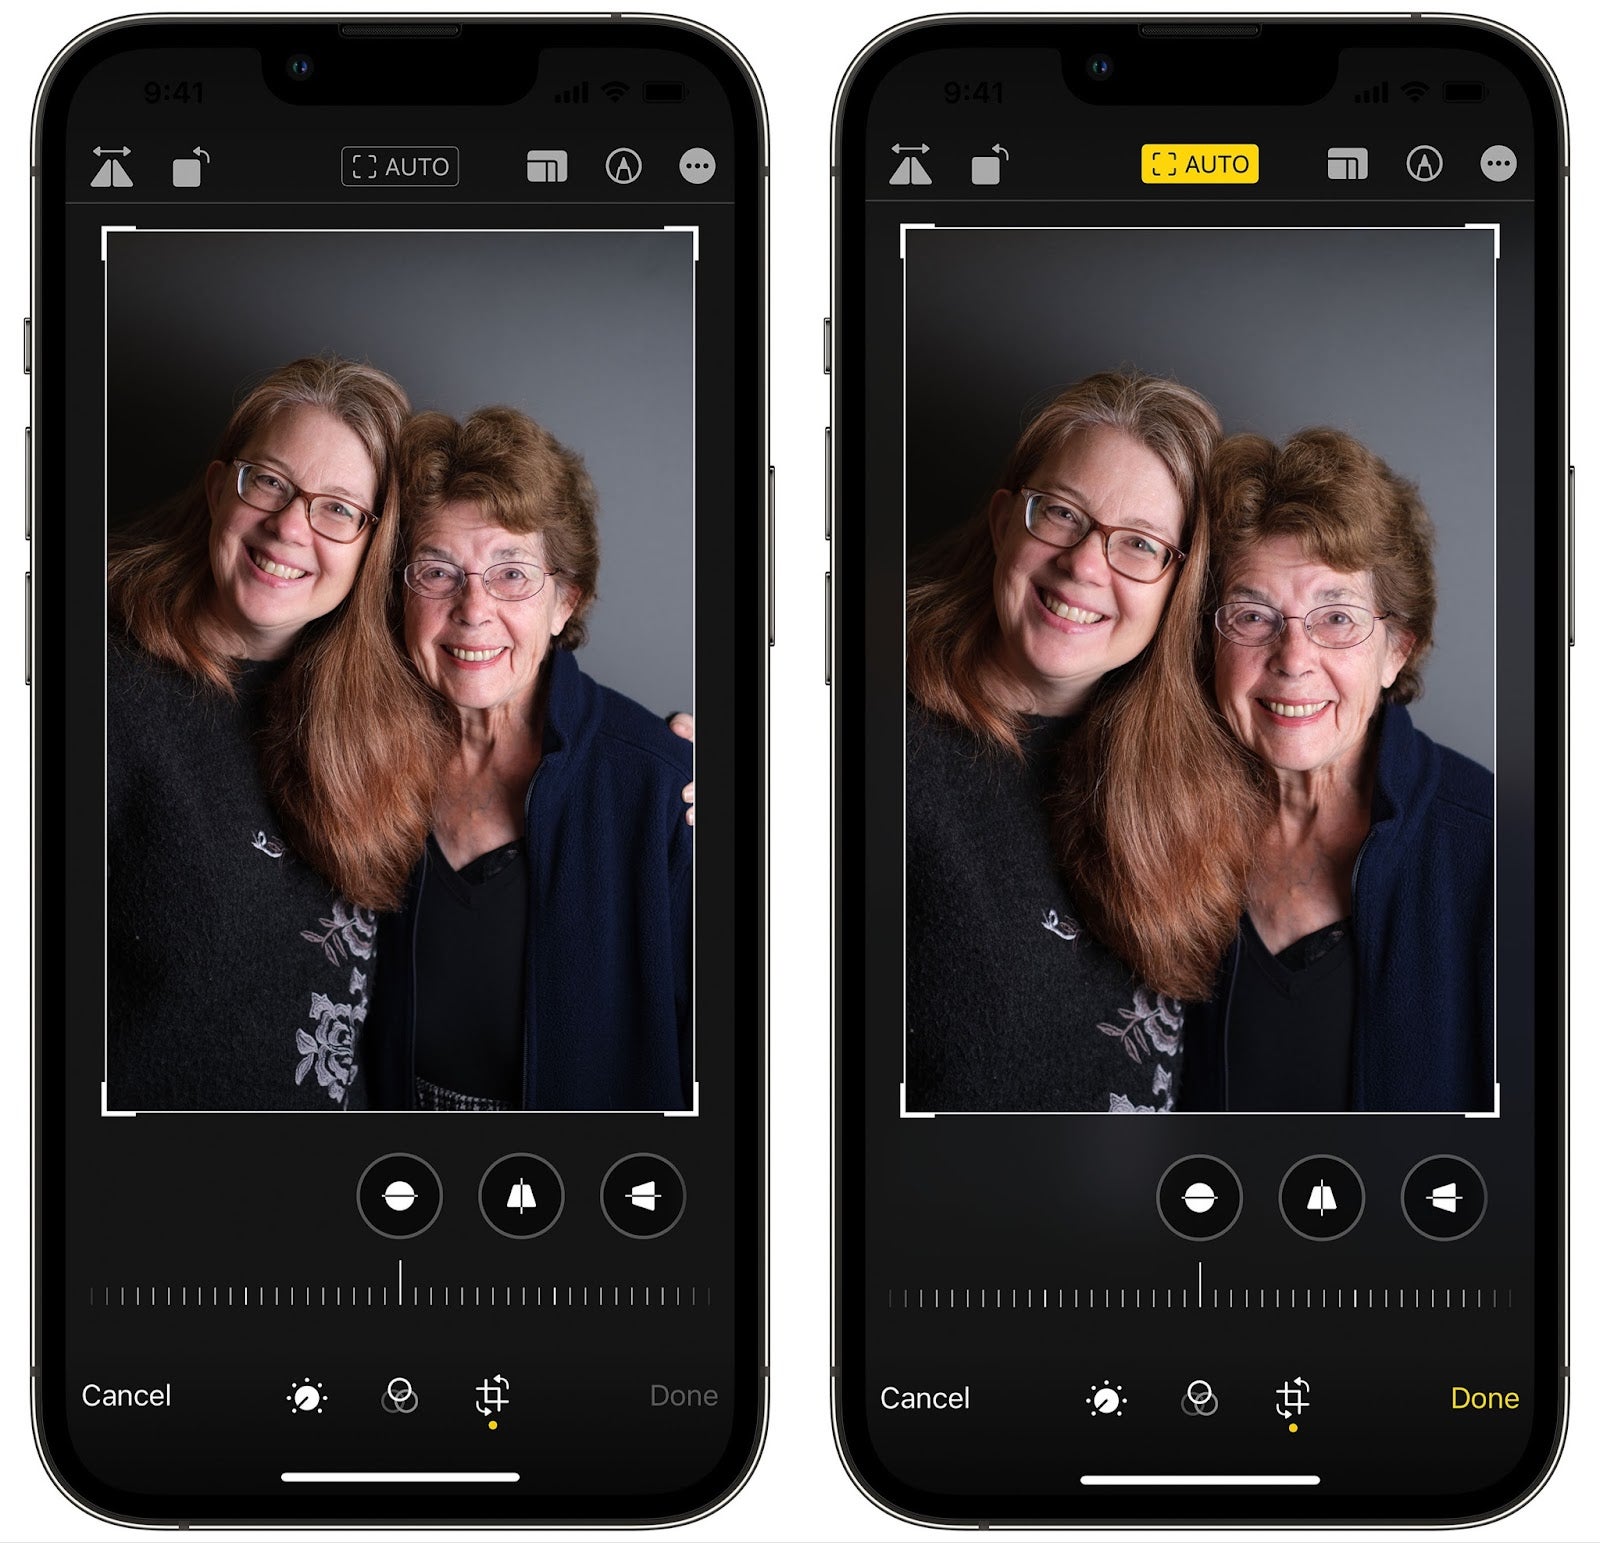 Apple Photos on the iPhone 13 Pro displays an Auto button when it detects people in the image (left). The automatic crop is applied at right